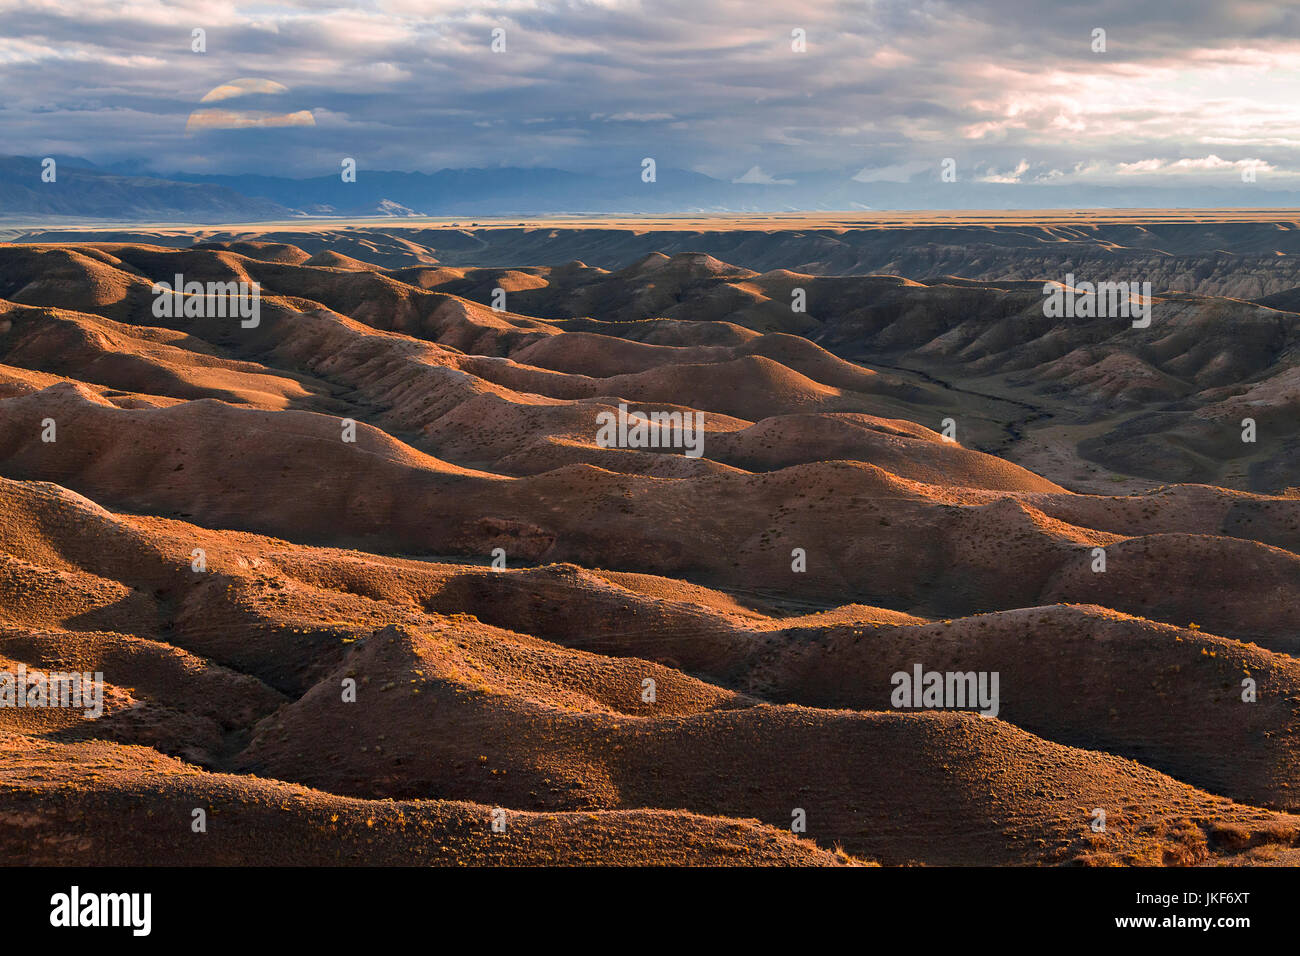 Extreme terrain of Kazakhstan at the sunset with full moon rising. Stock Photo